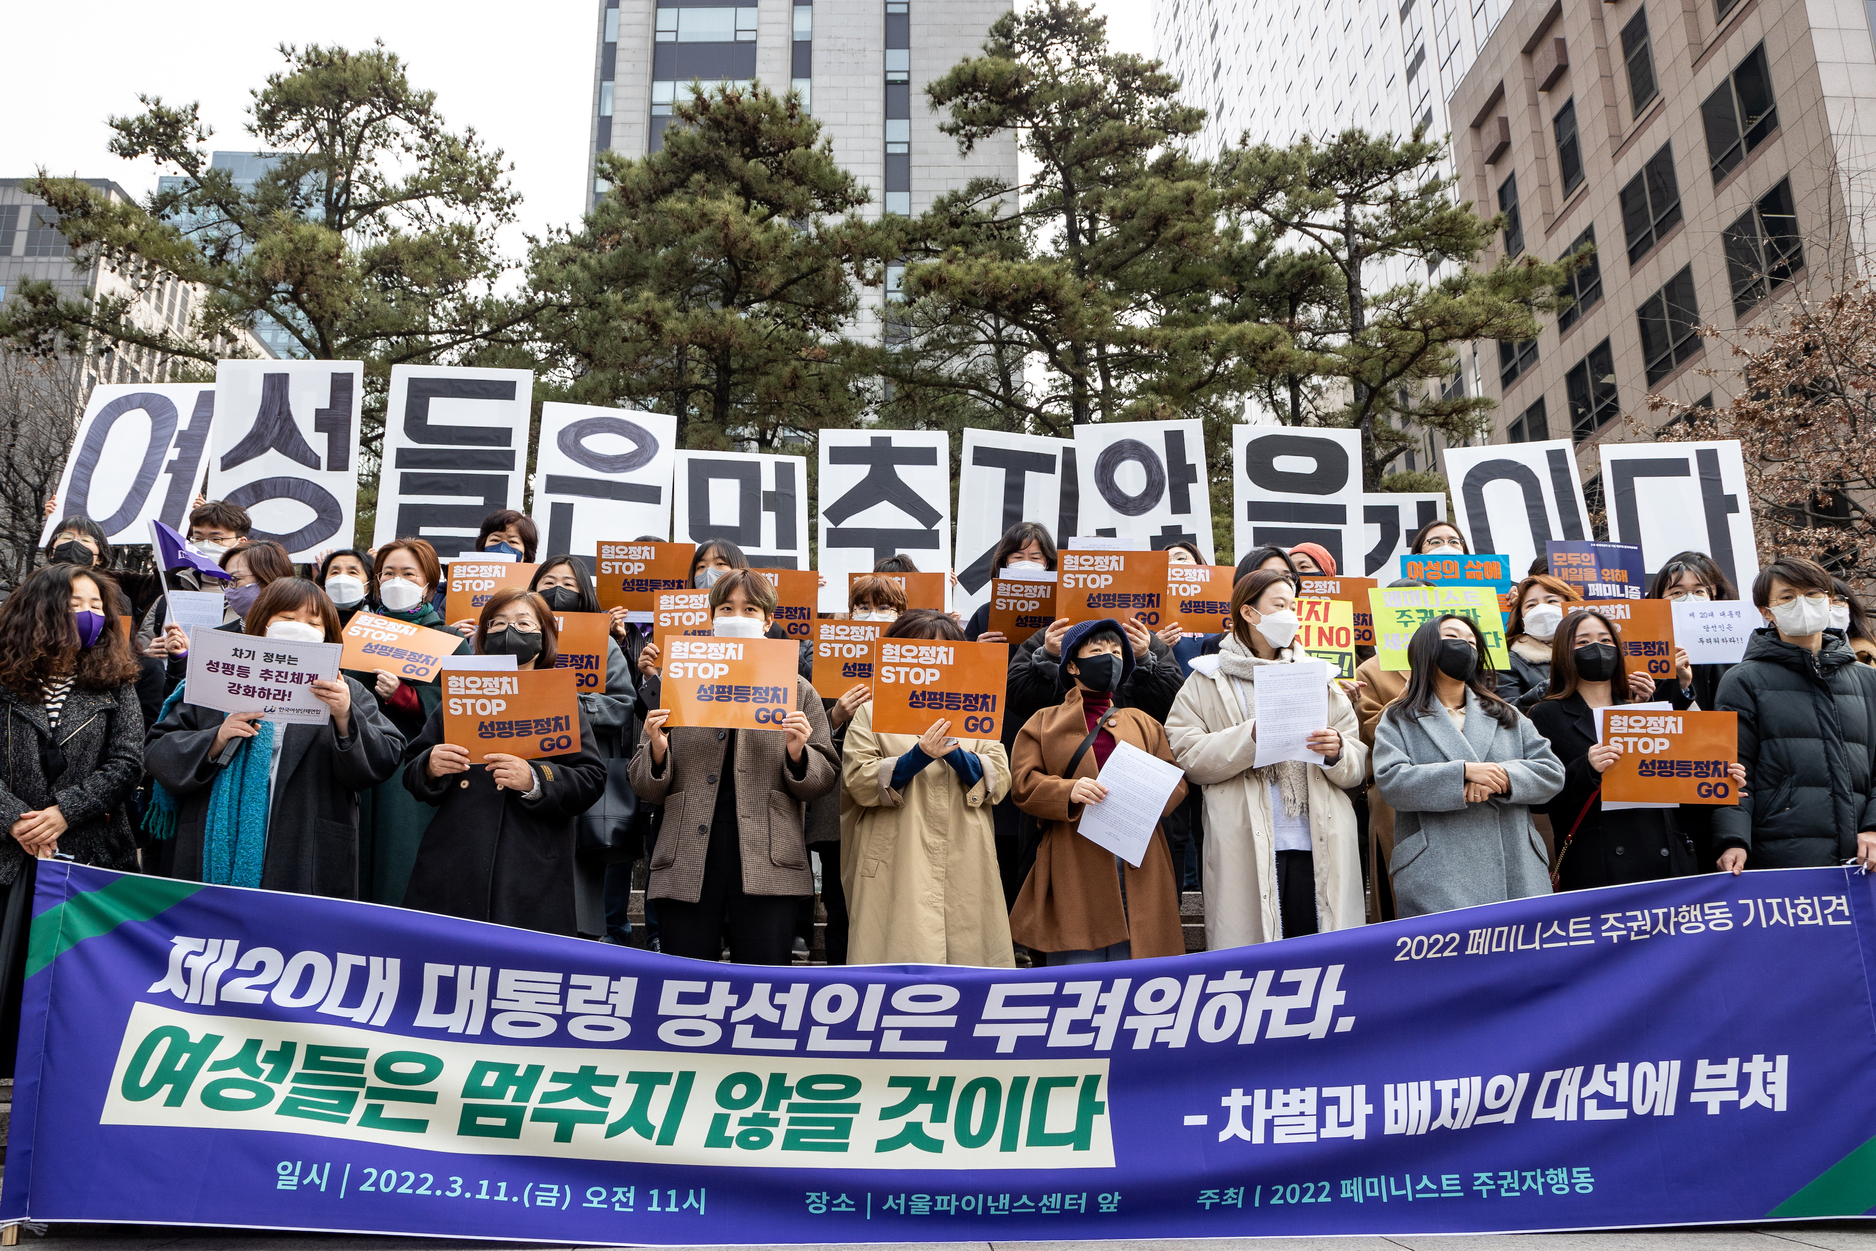 South Koreas misogyny problem East Asia Forum picture pic